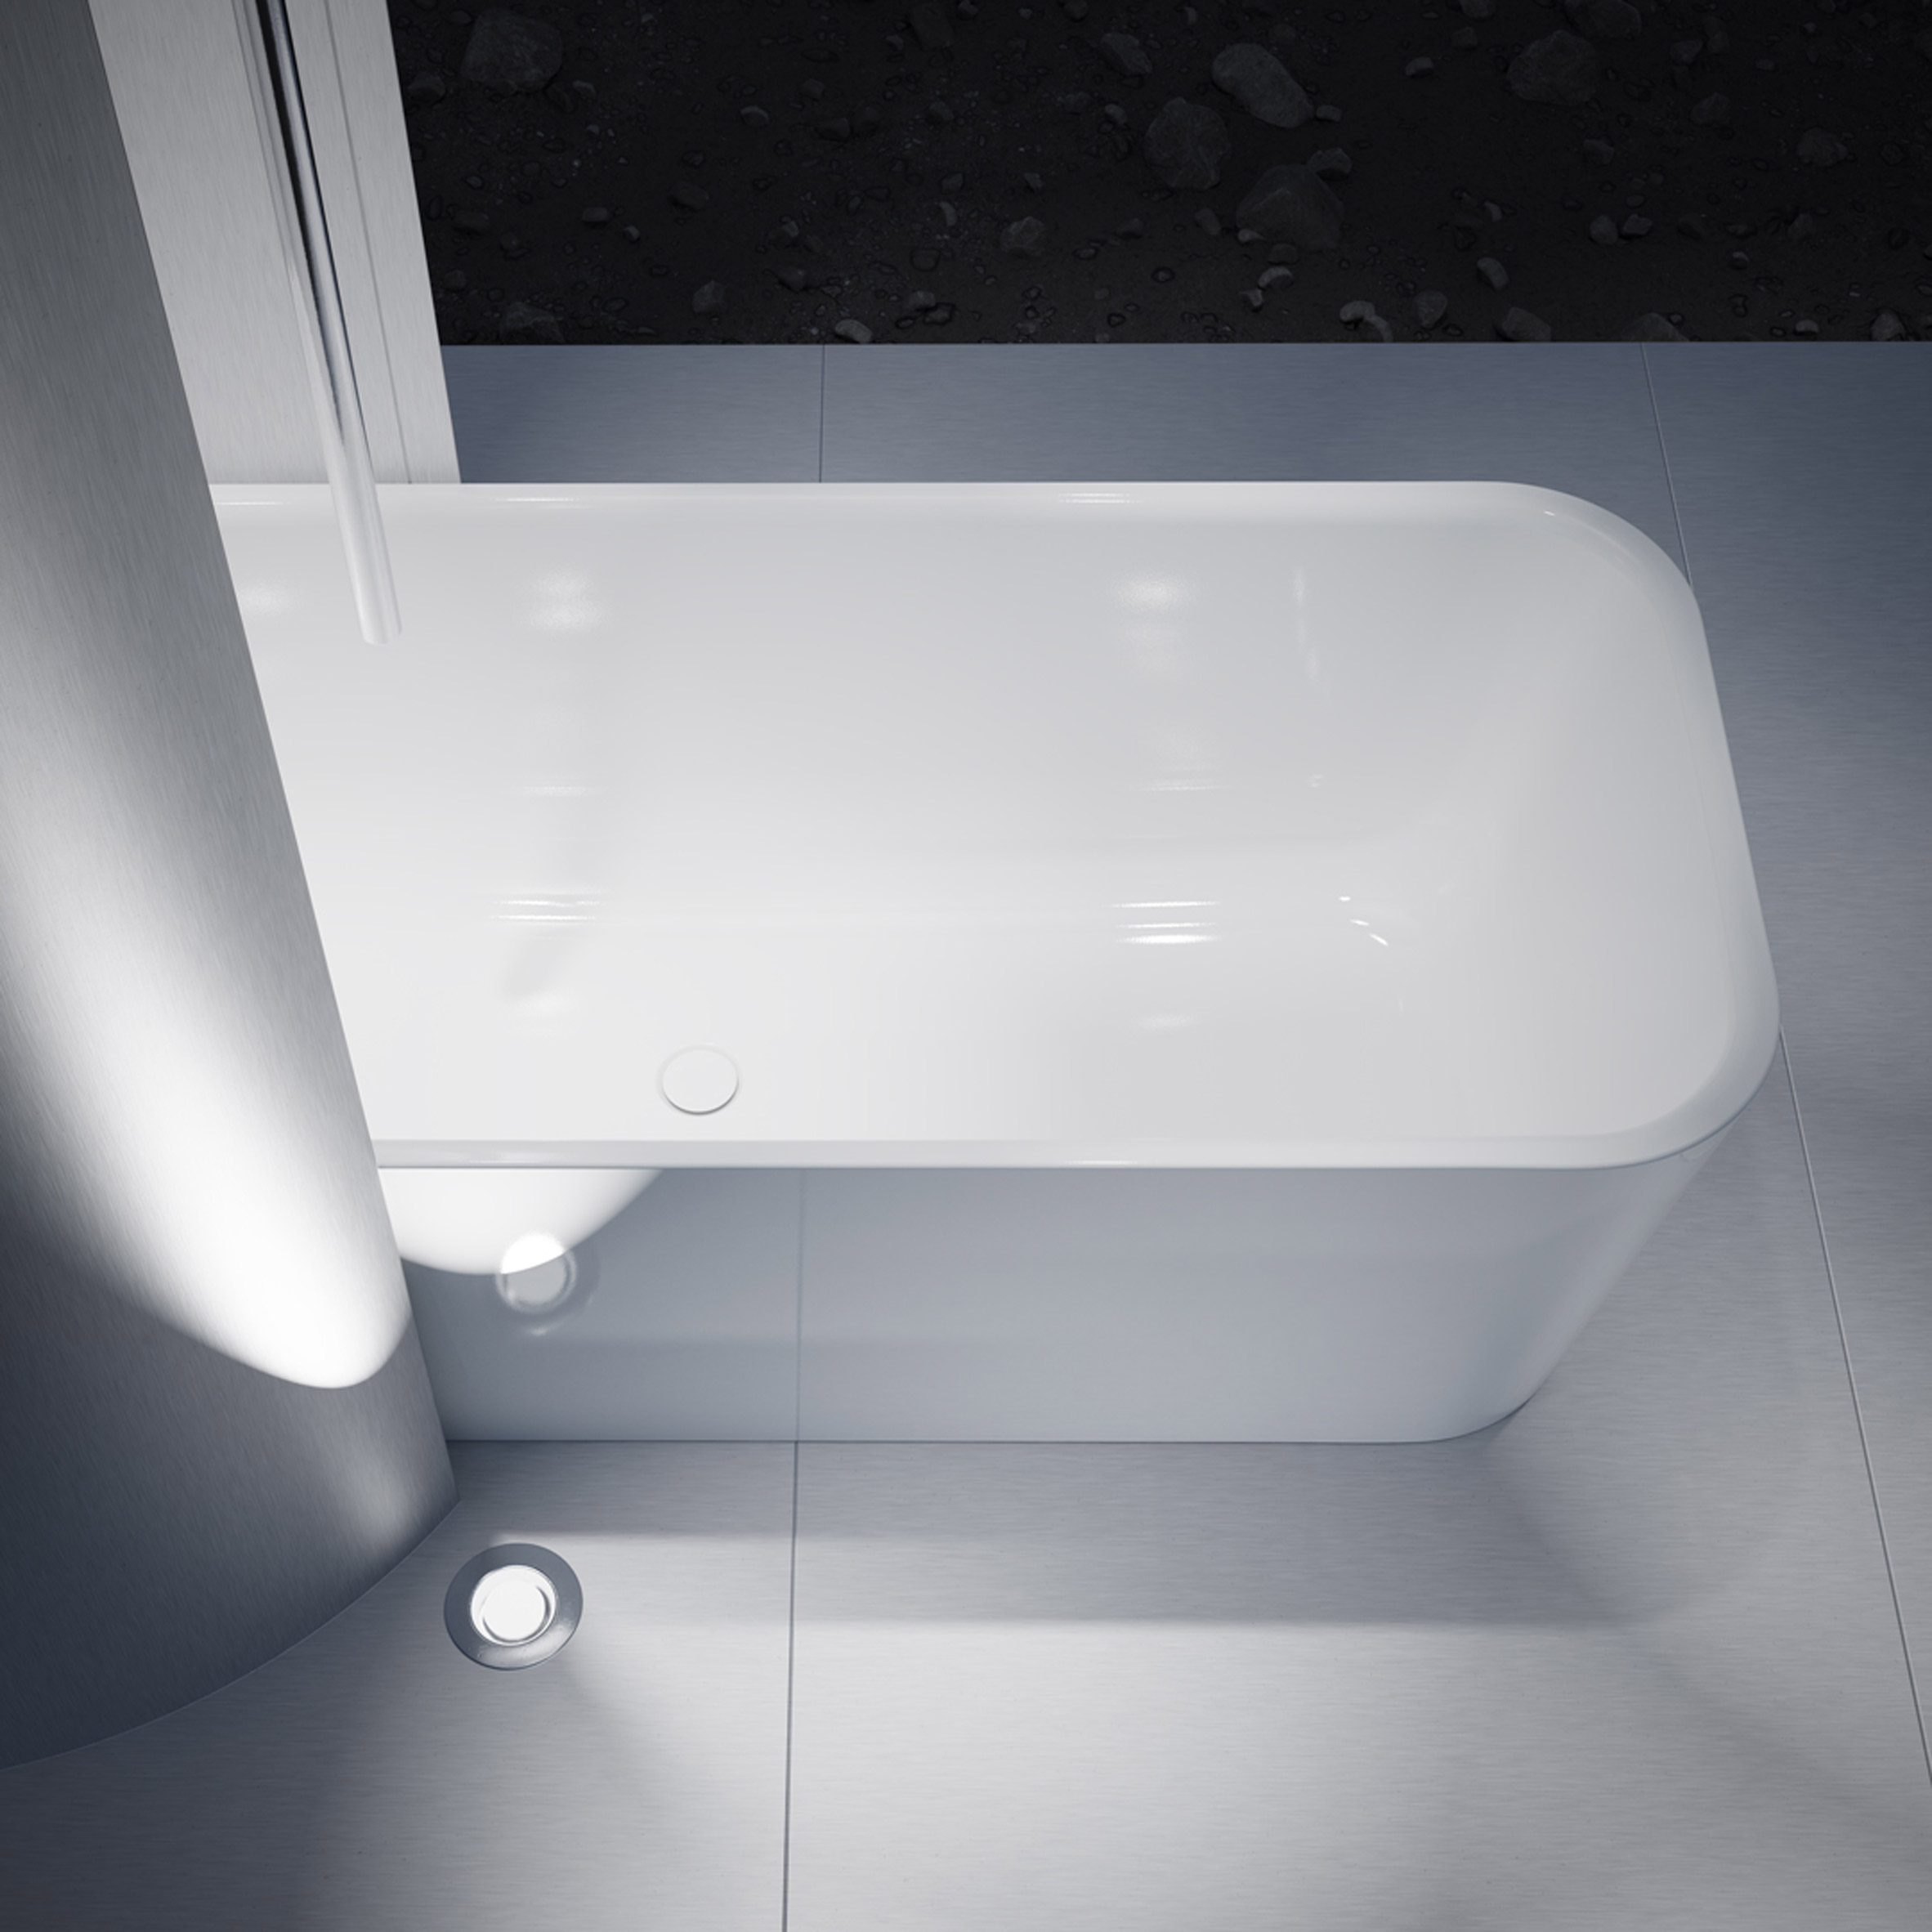 Purist bathtub by Bette in a white tiled bathroom